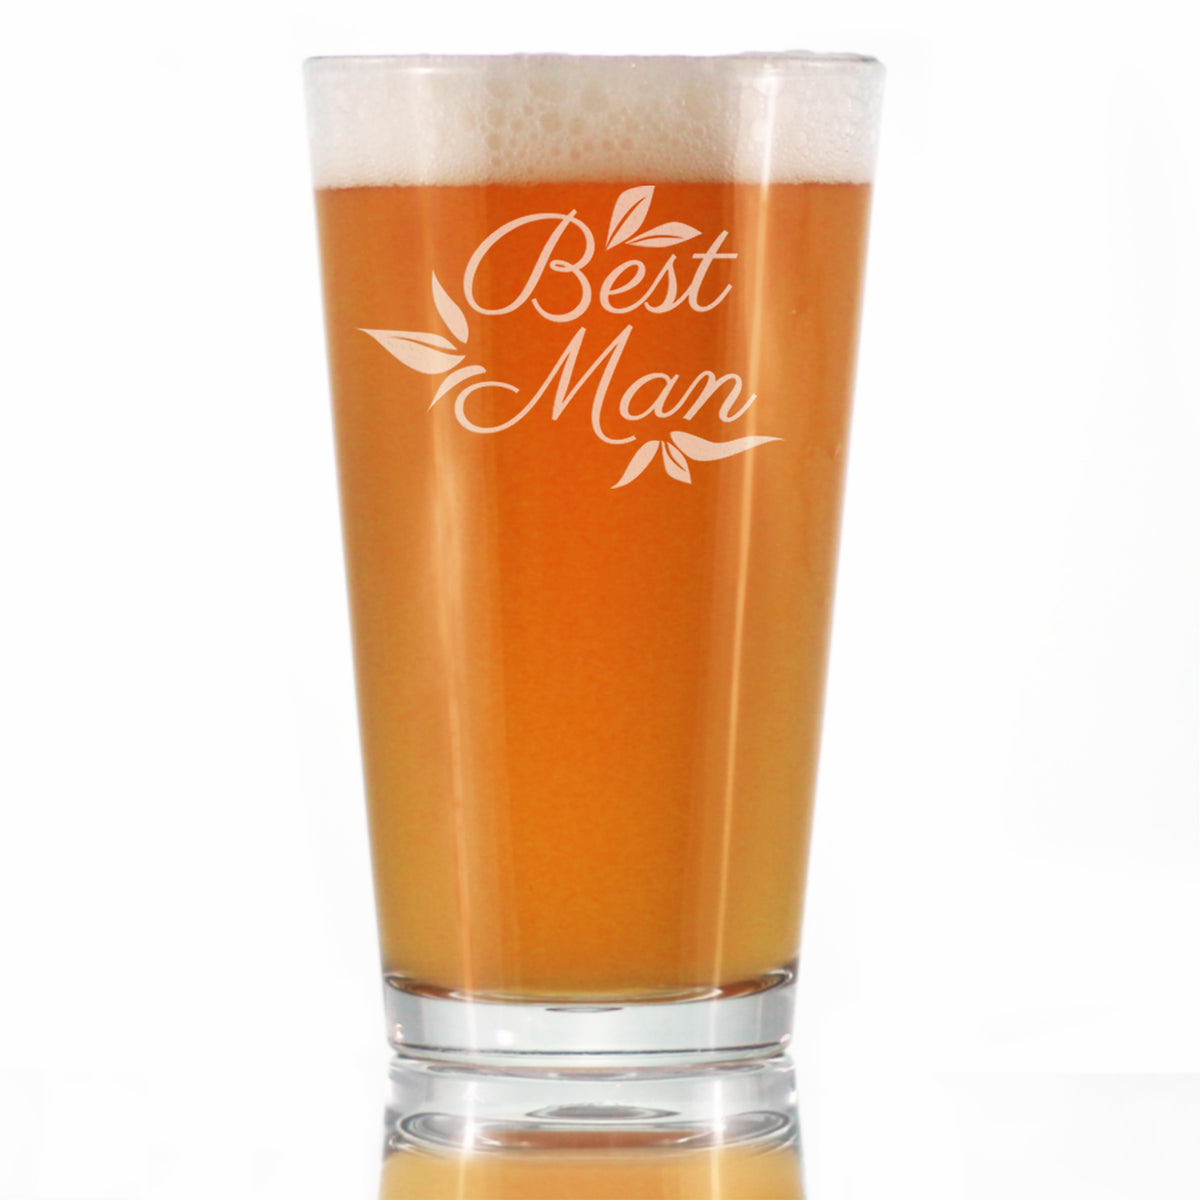 Best Man Pint Glass - Groomsmen Proposal Gifts - Unique Engraved Wedding Cup Gift